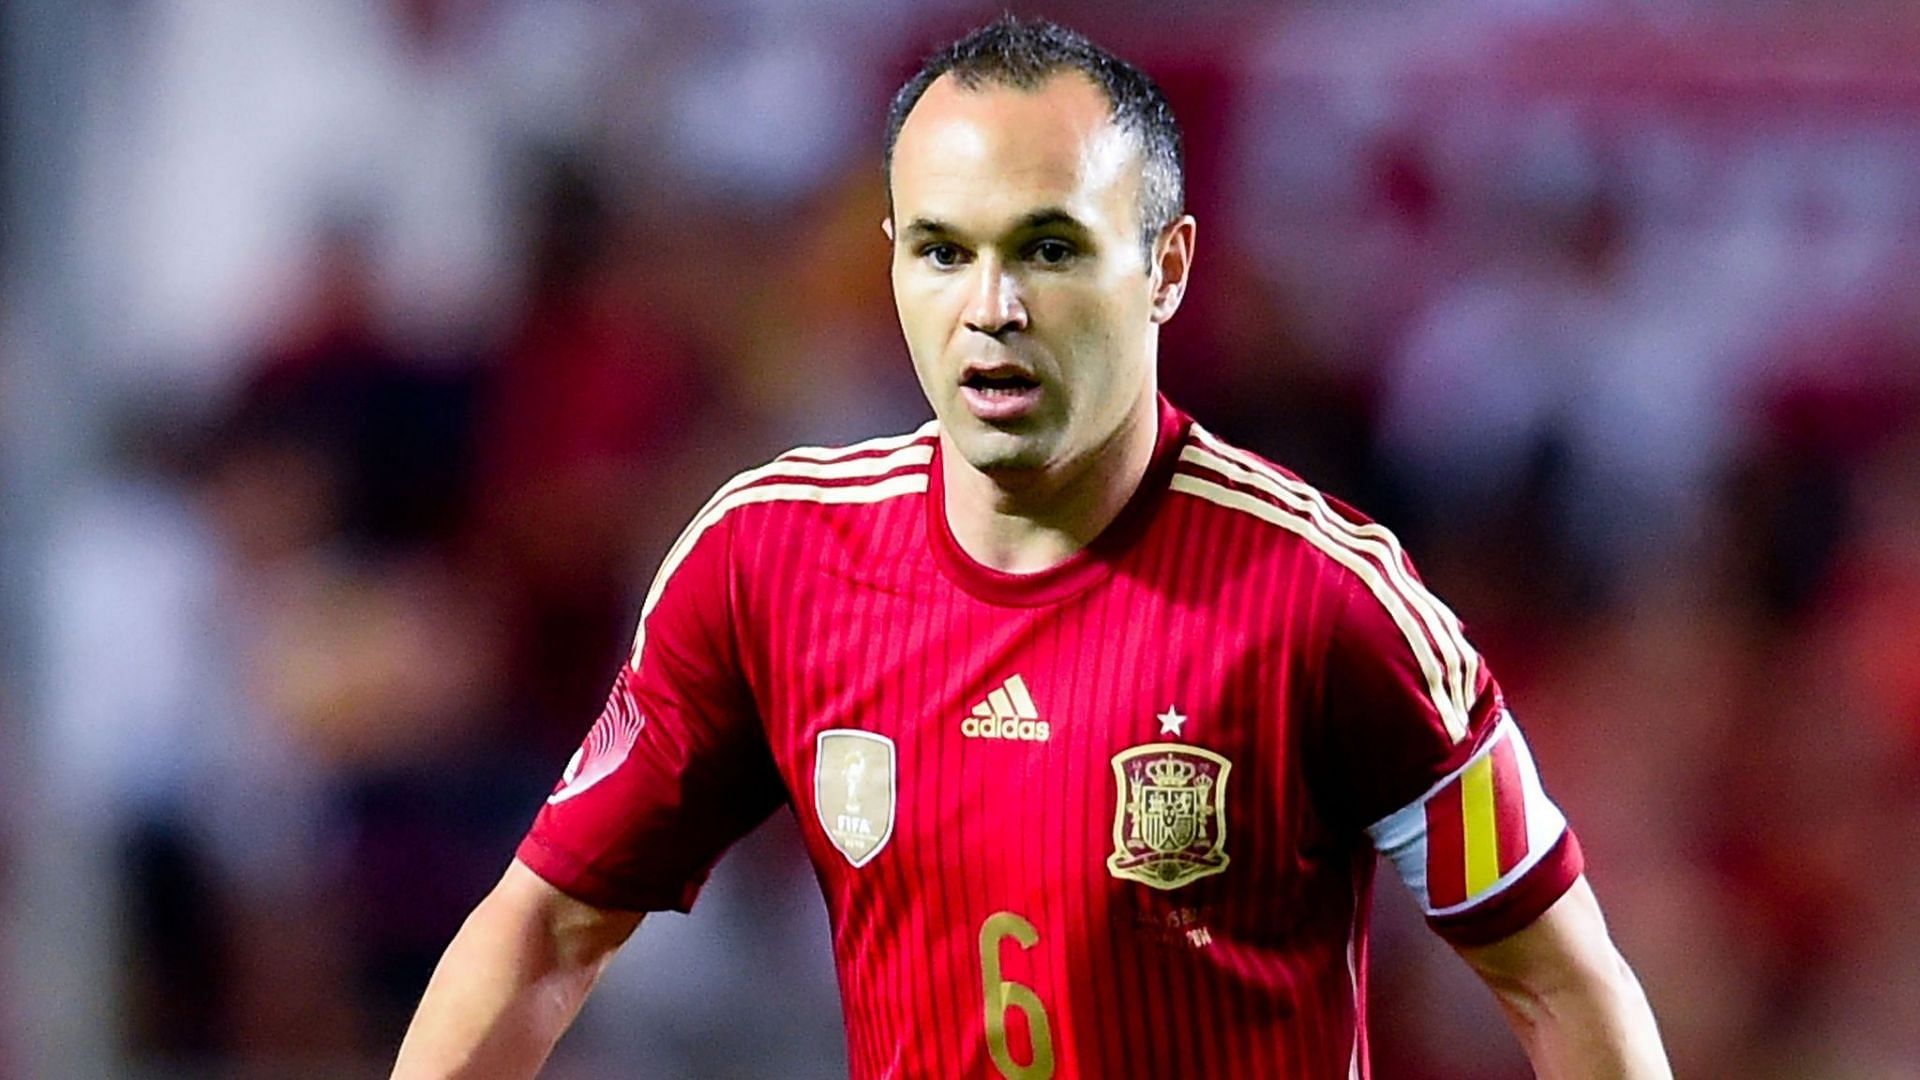 Andres Iniesta was a genius on and off the ball - a pleasure to watch!